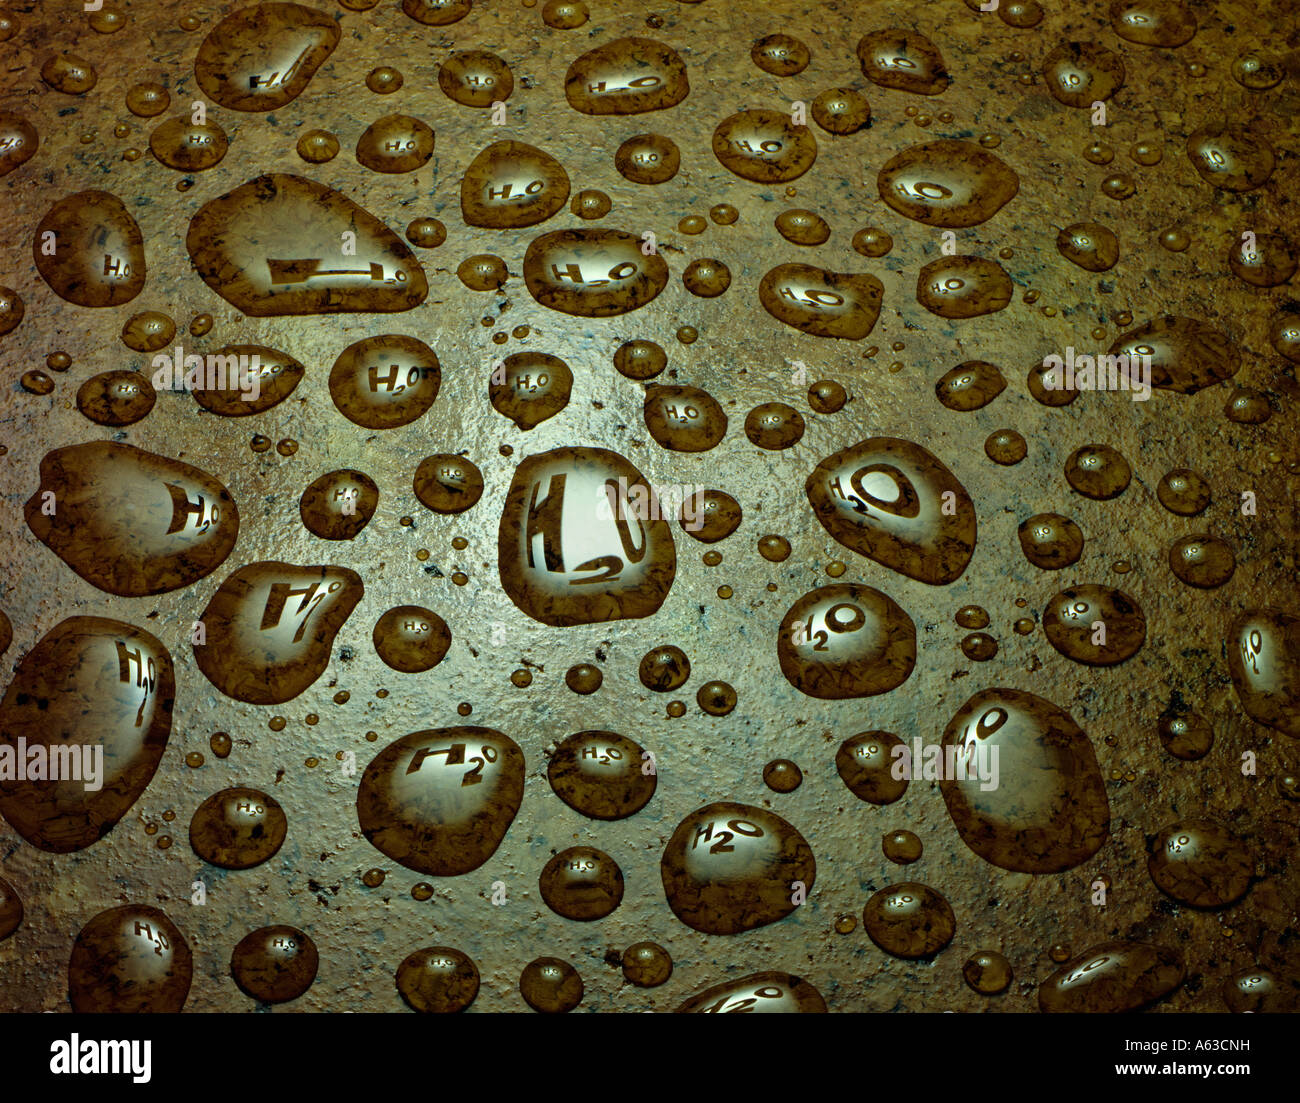 WATER DROPLETS ON BROWN SURFACE REFLECTING CHEMICAL SYMBOL H20 Stock Photo